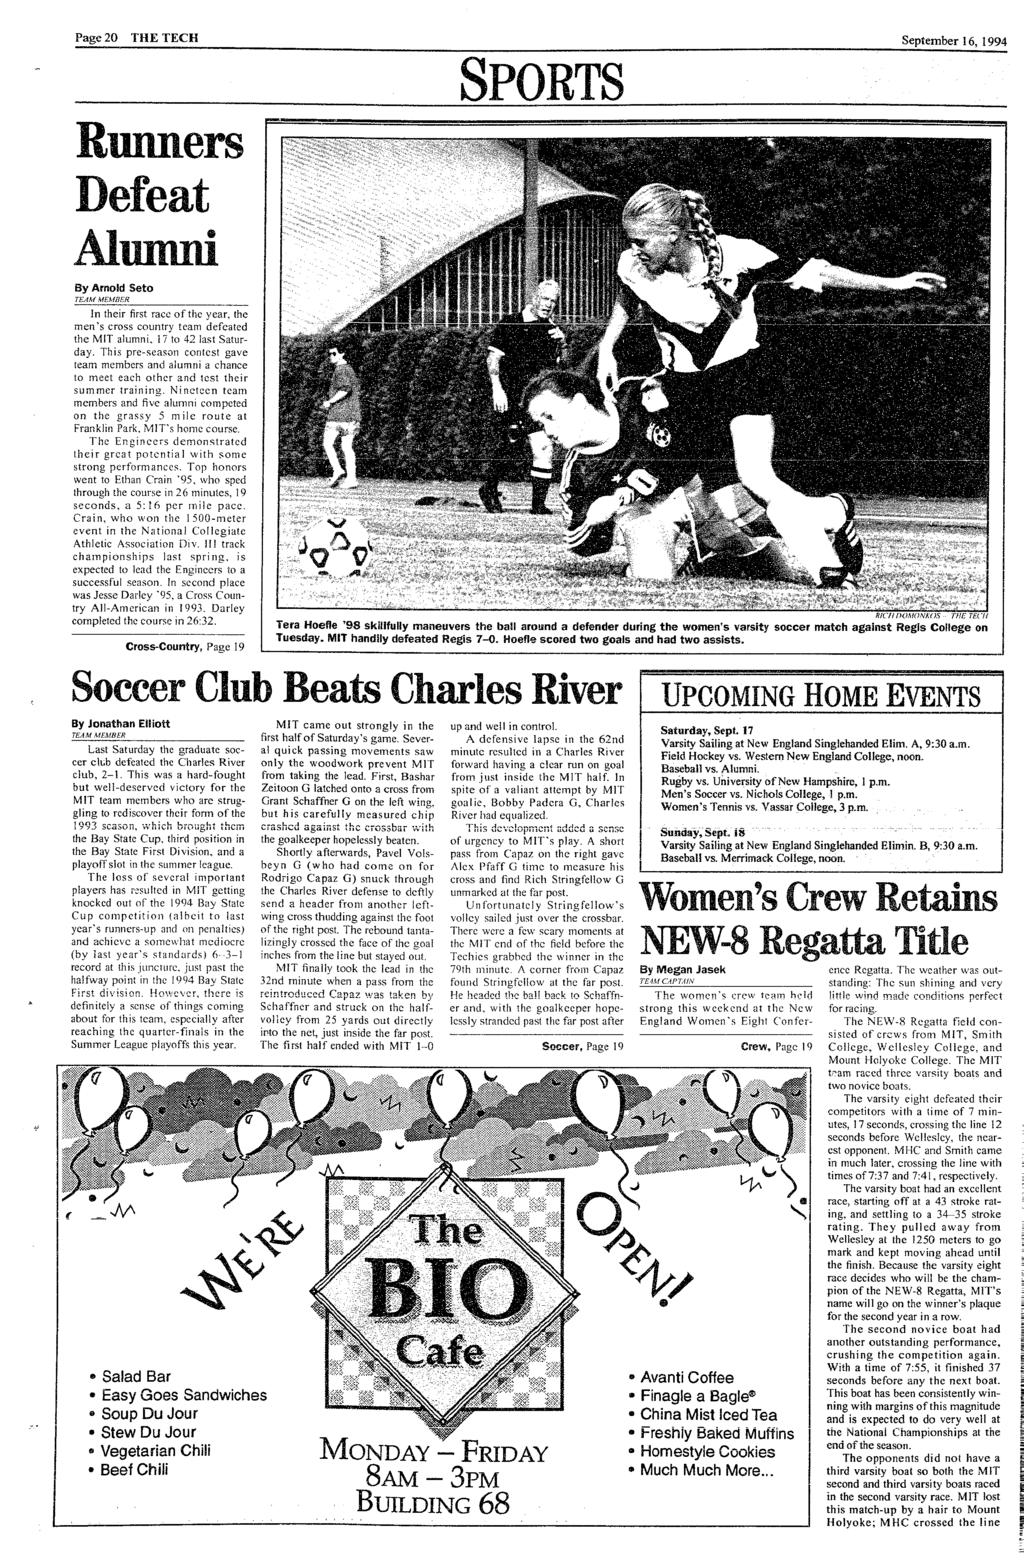 SPORTS Page 20 THE TECH September 16, 1994 Runners Defeat LpBBc-n - - ru --us-- --- --- - - - - - ---- -- - - - - - - - ''" '*! C.:,'",:;'" :"Y *, ".: '". '.."... l;".-- ::." :,:-: ;.